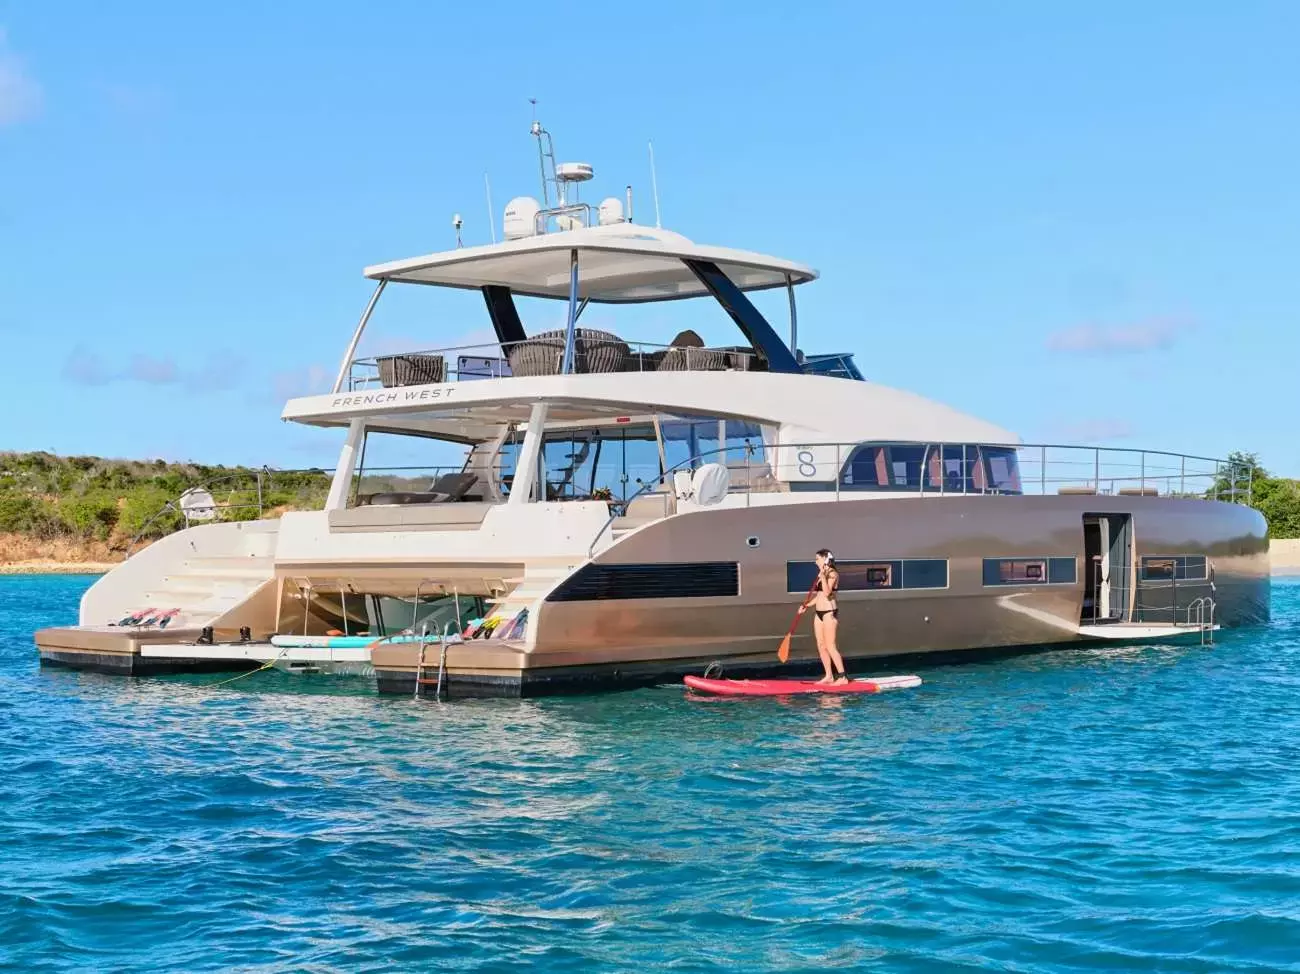 Frenchwest by Lagoon - Top rates for a Rental of a private Power Catamaran in St Lucia